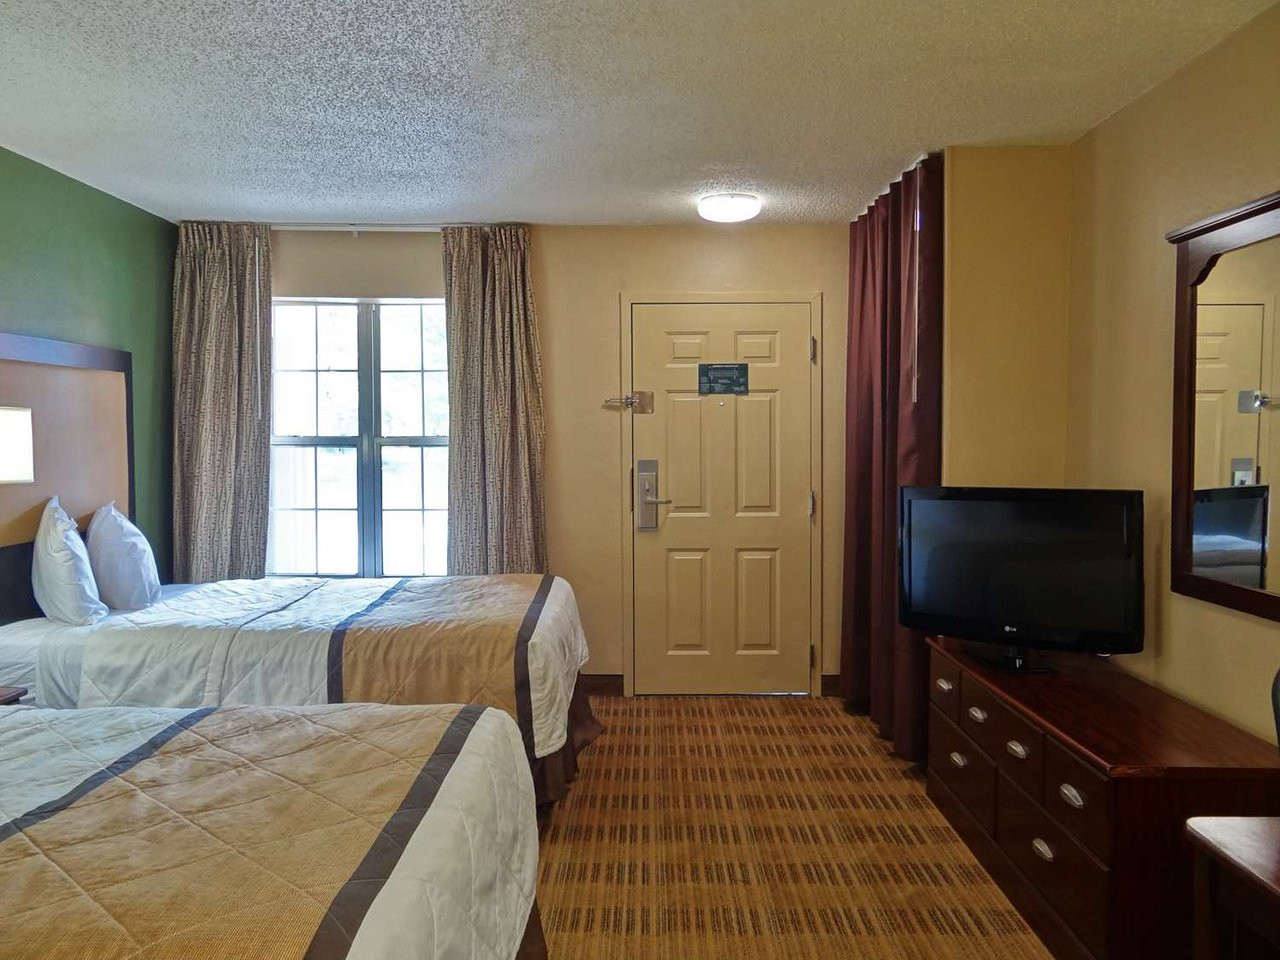 hardwood floor cleaning fayetteville nc of extended stay america fayetteville owen dr 67 i¶7i¶5i¶ for extended stay america fayetteville owen dr 67 i¶7i¶5i¶ updated 2018 prices hotel reviews nc tripadvisor